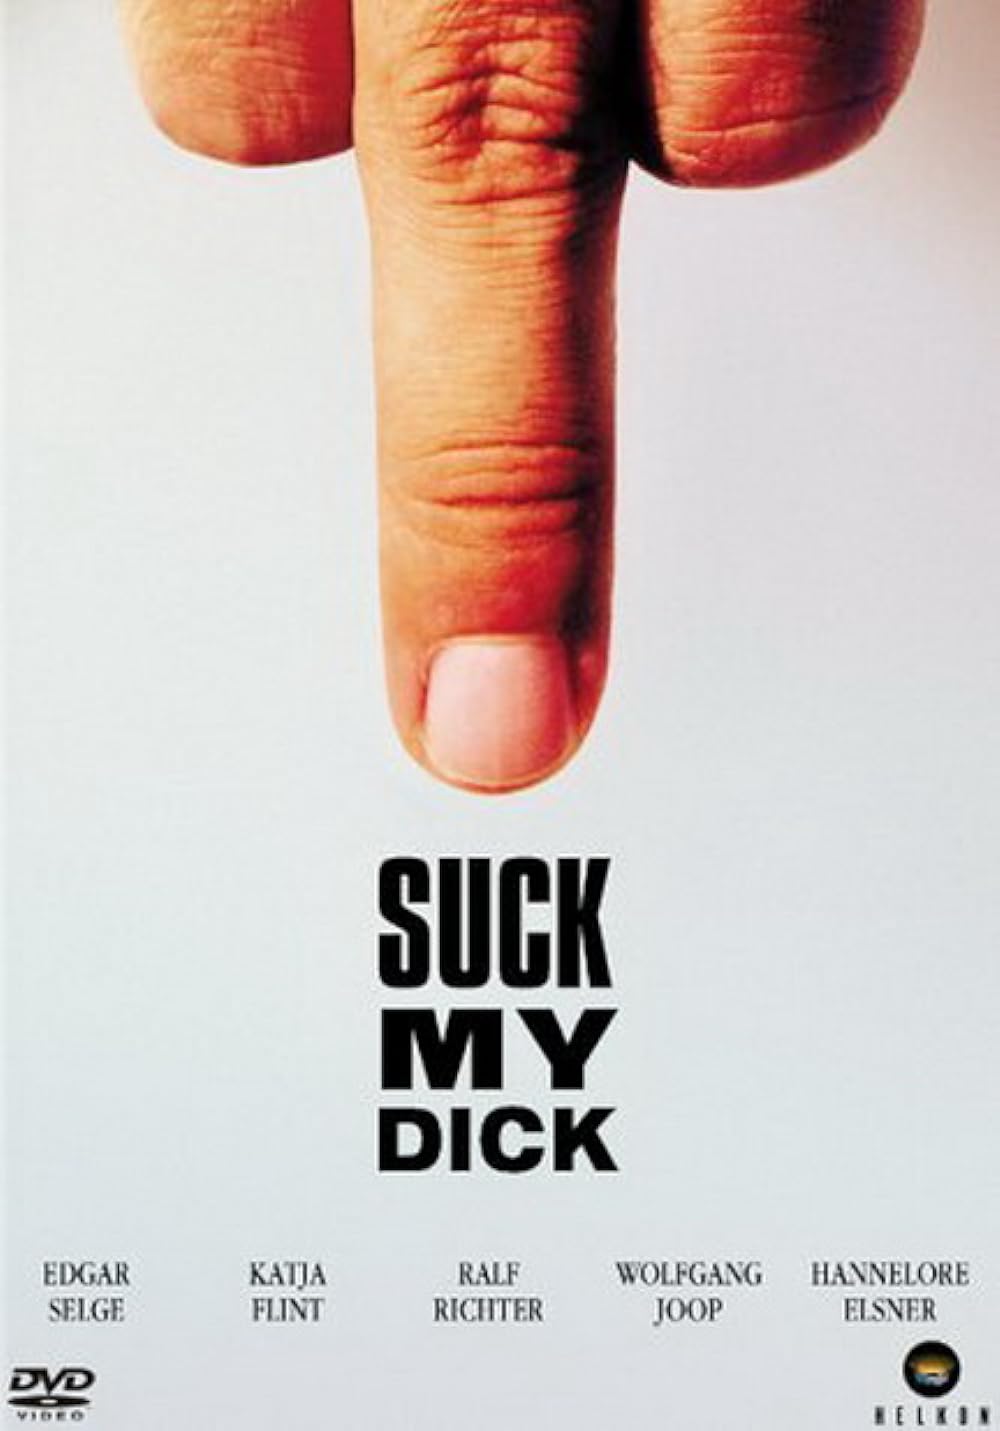 chady chayeb recommends suck my long dick pic